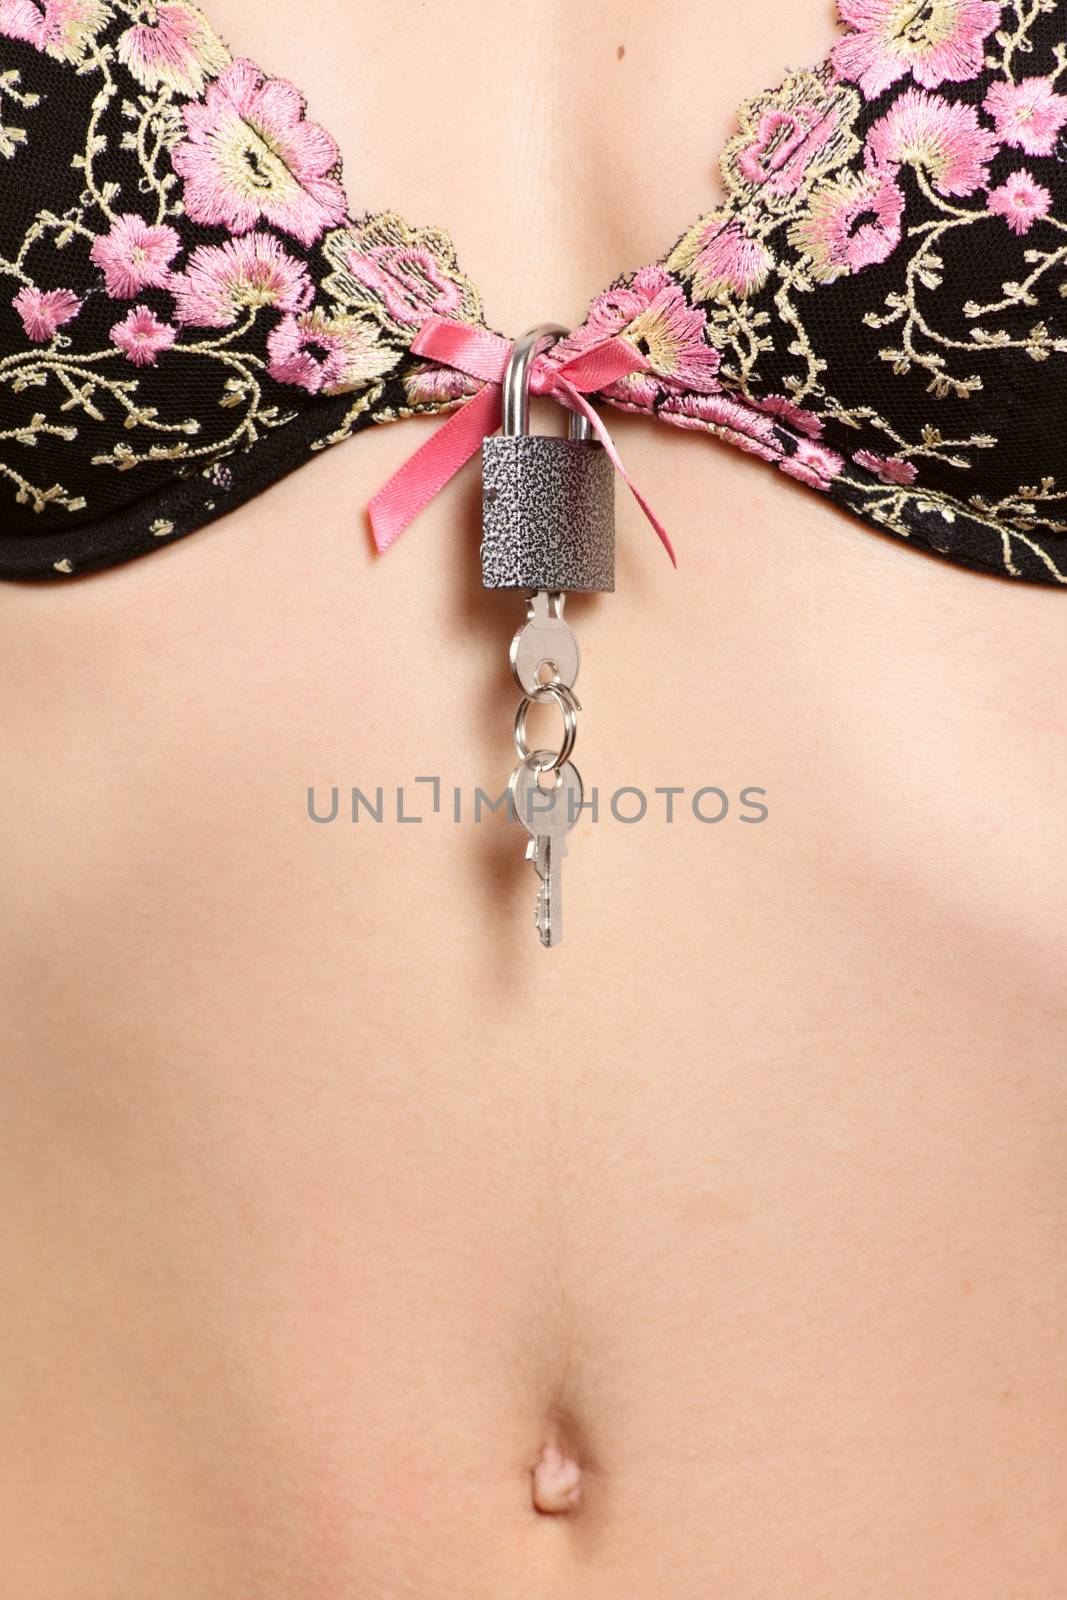 Breast of the girl in bra with a padlock and keys removed close up